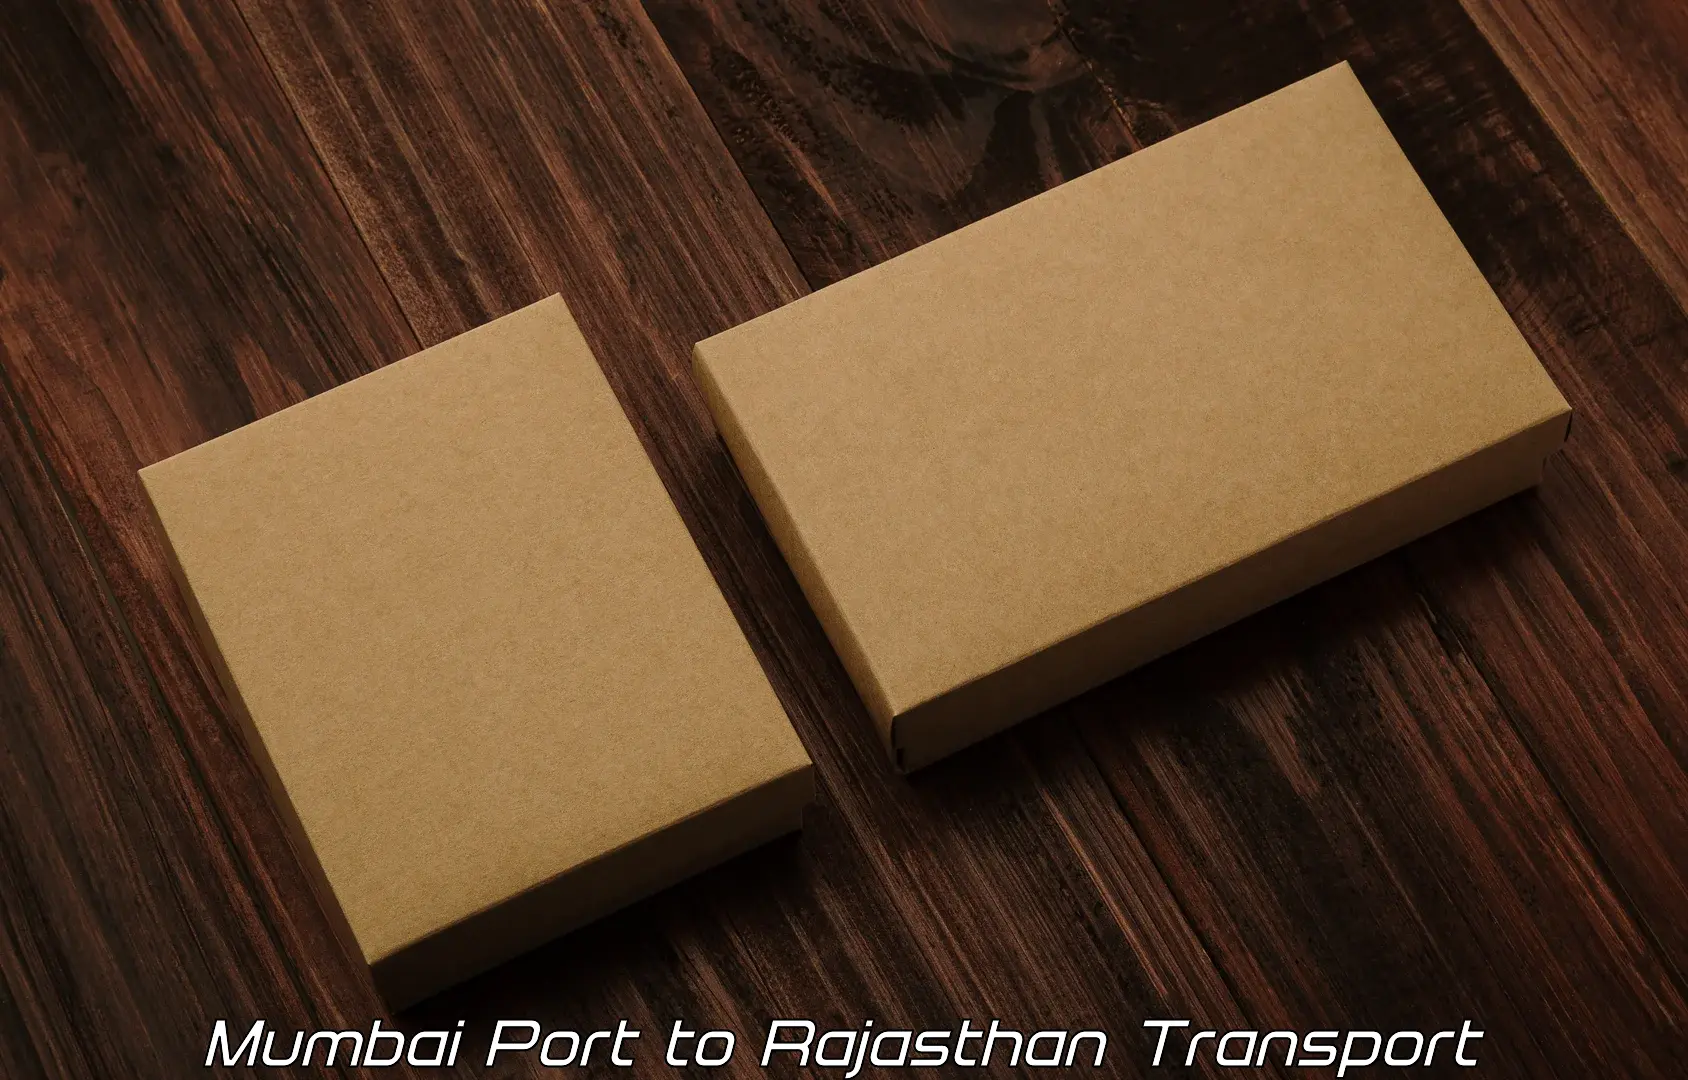 Transport bike from one state to another Mumbai Port to Gharsana